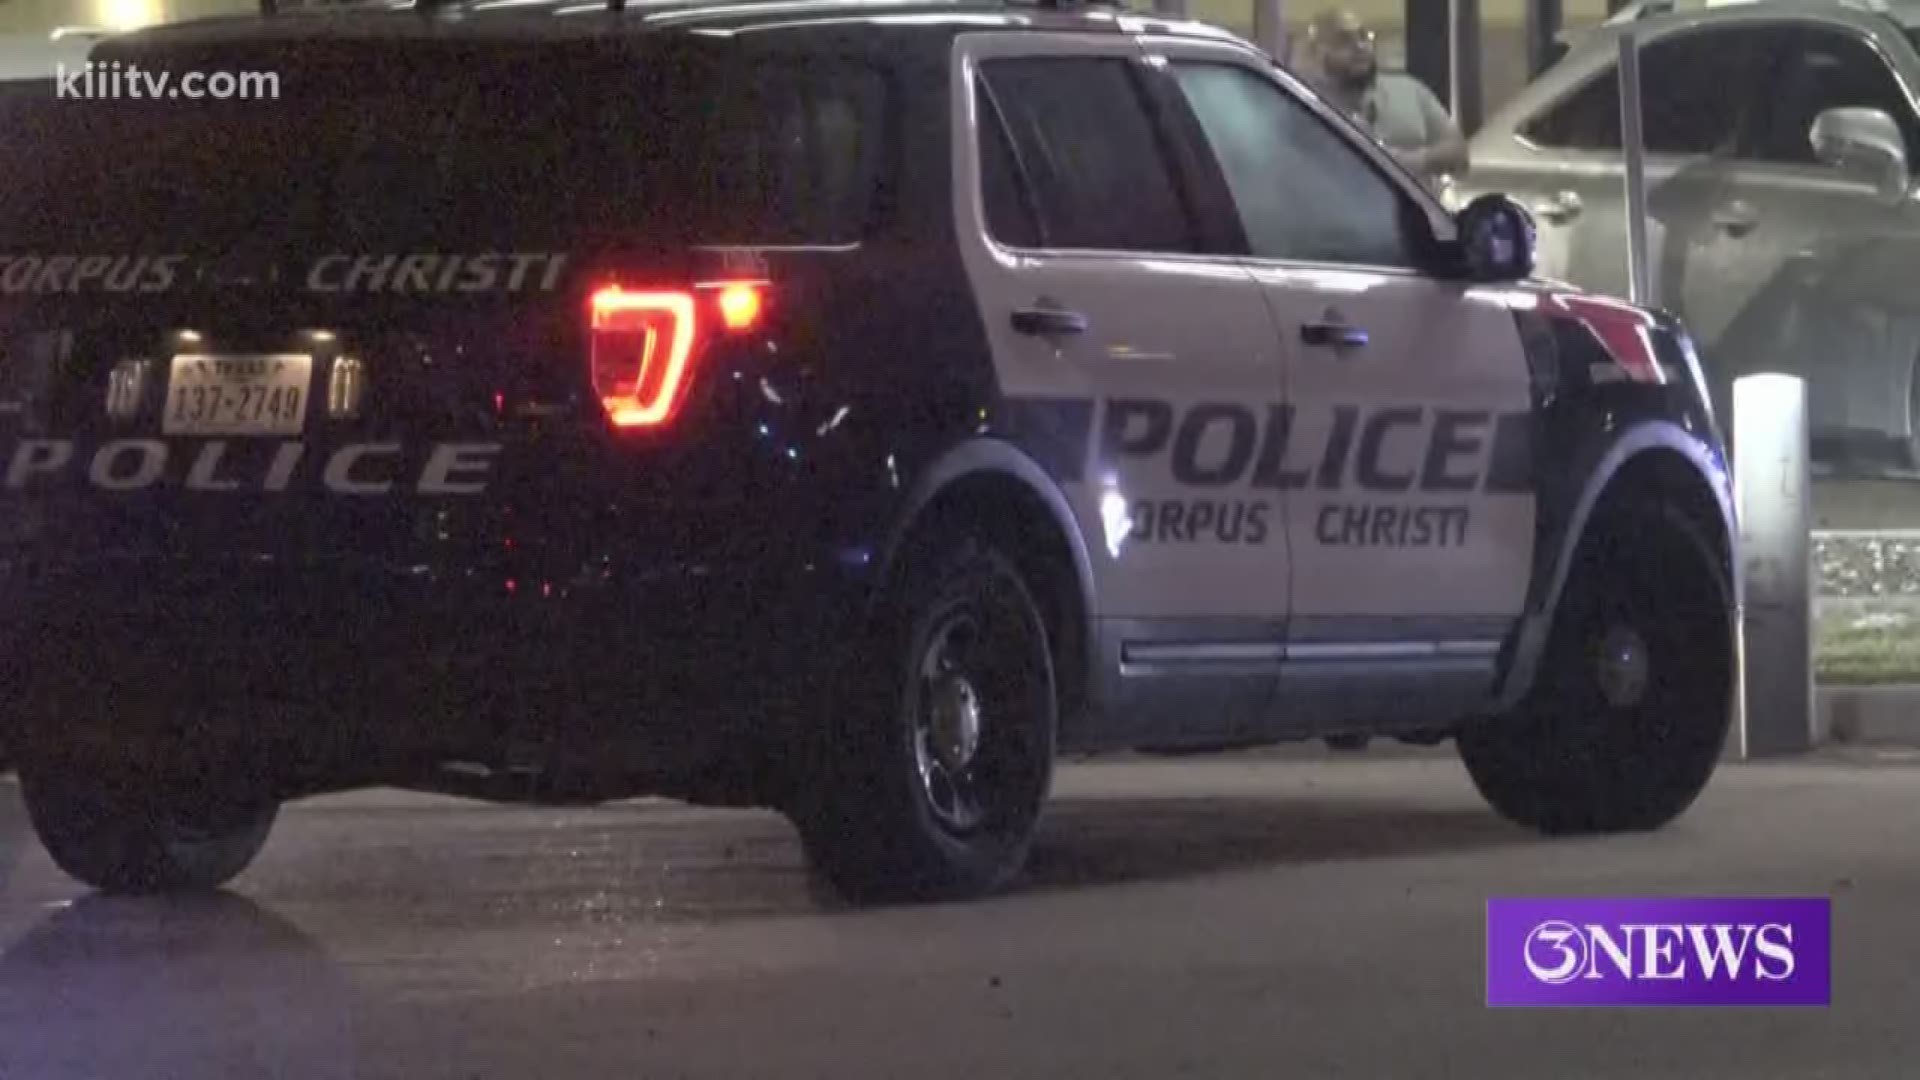 A Corpus Christi Police officer fired their service weapon after an unidentified driver allegedly tried to hit them as they tried to initiated a traffic stop.